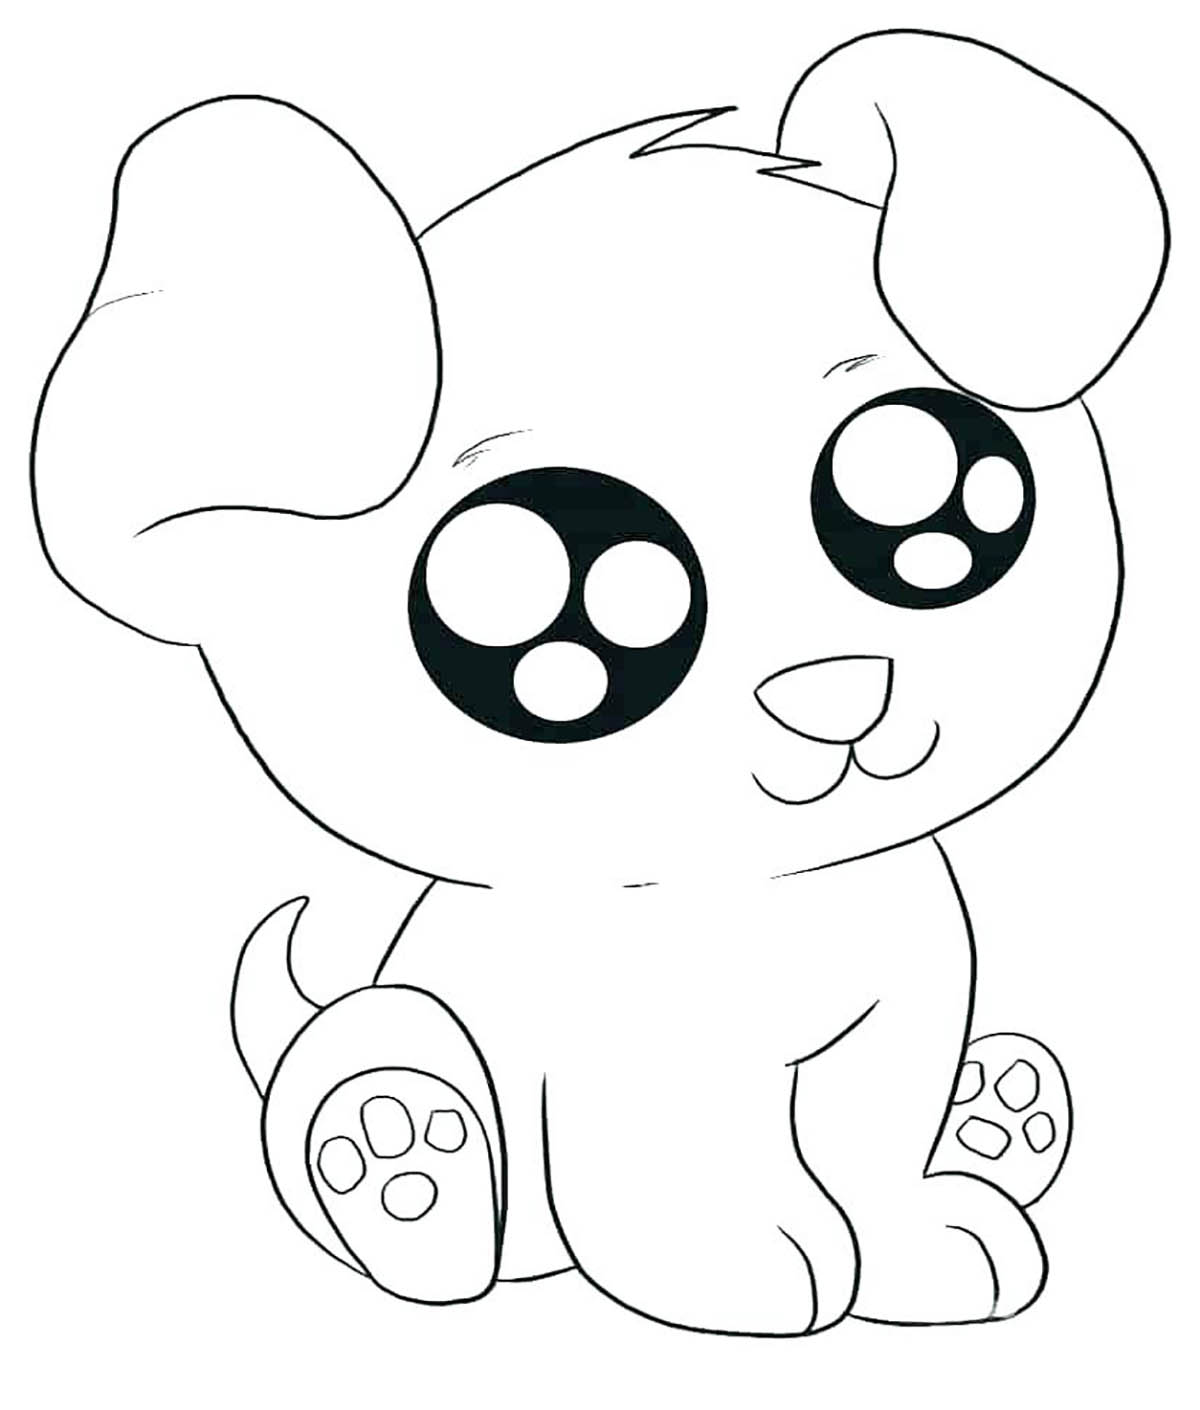 printable-coloring-pages-dogs